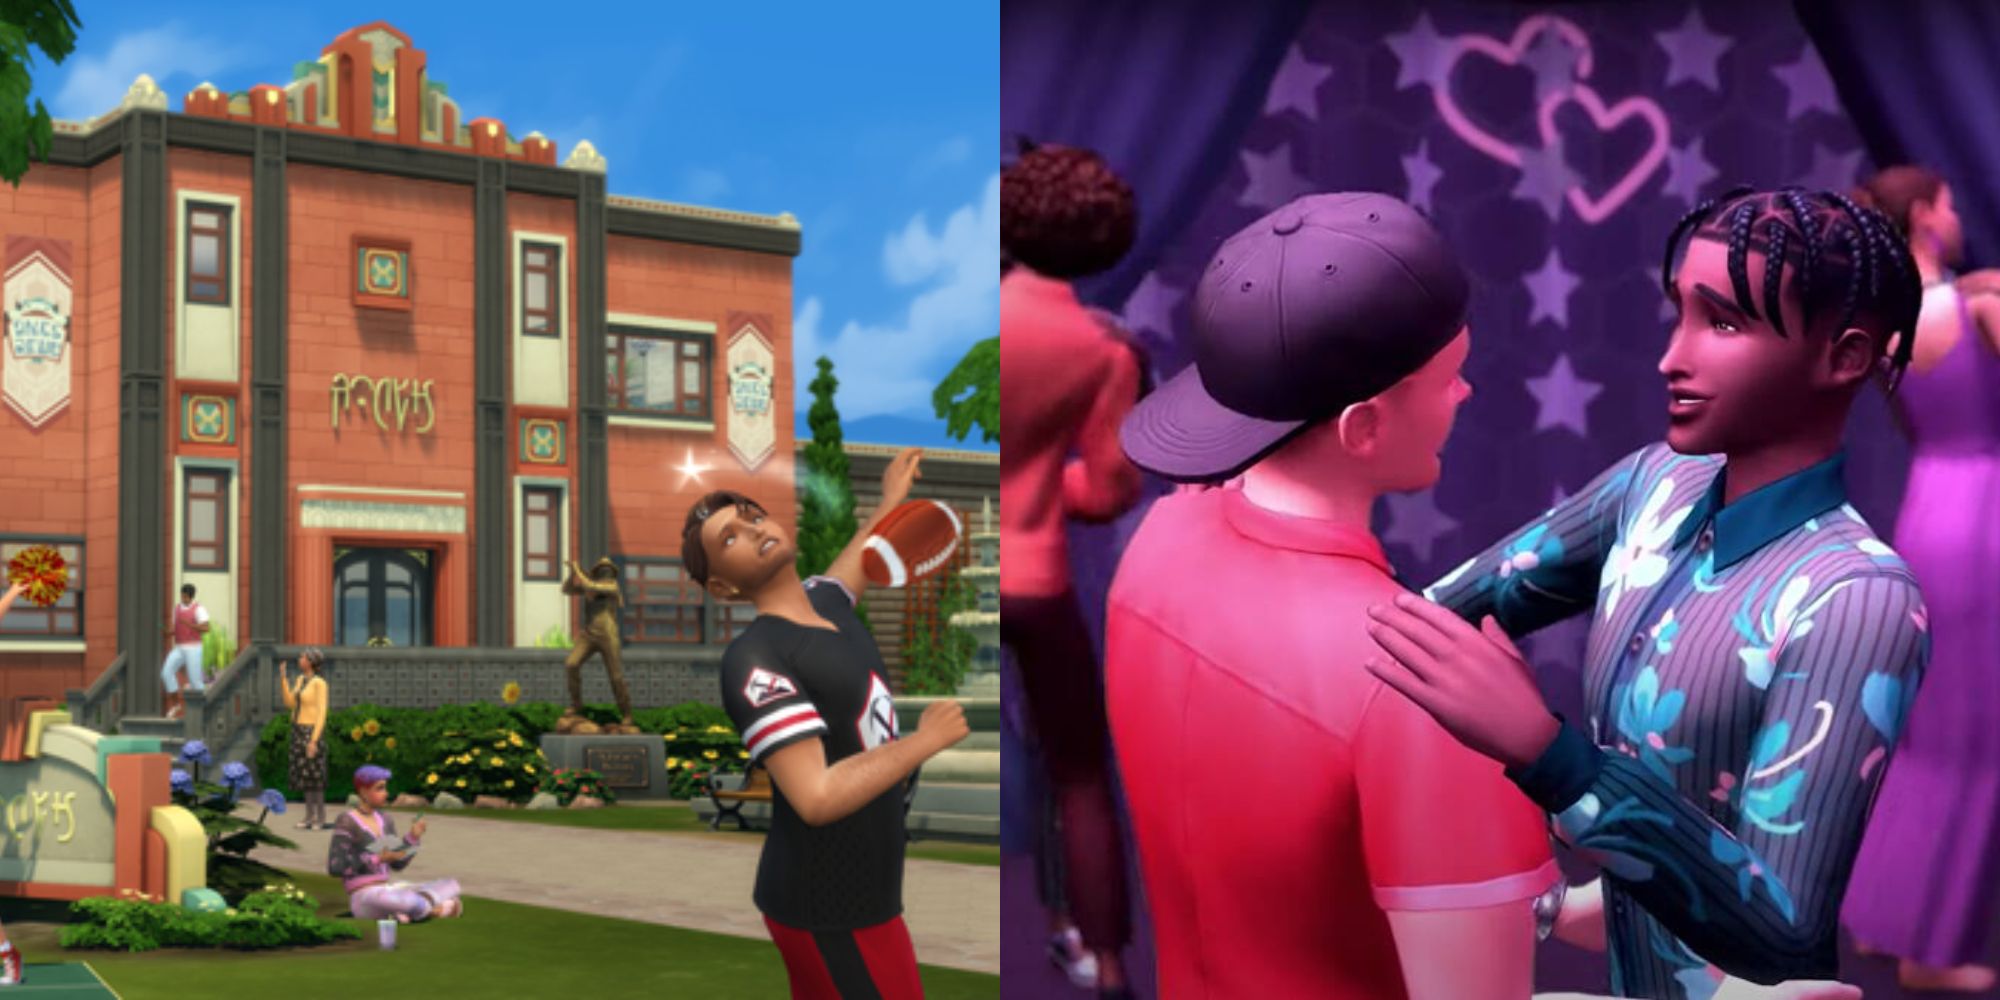 The Sims™ 4 High School Years